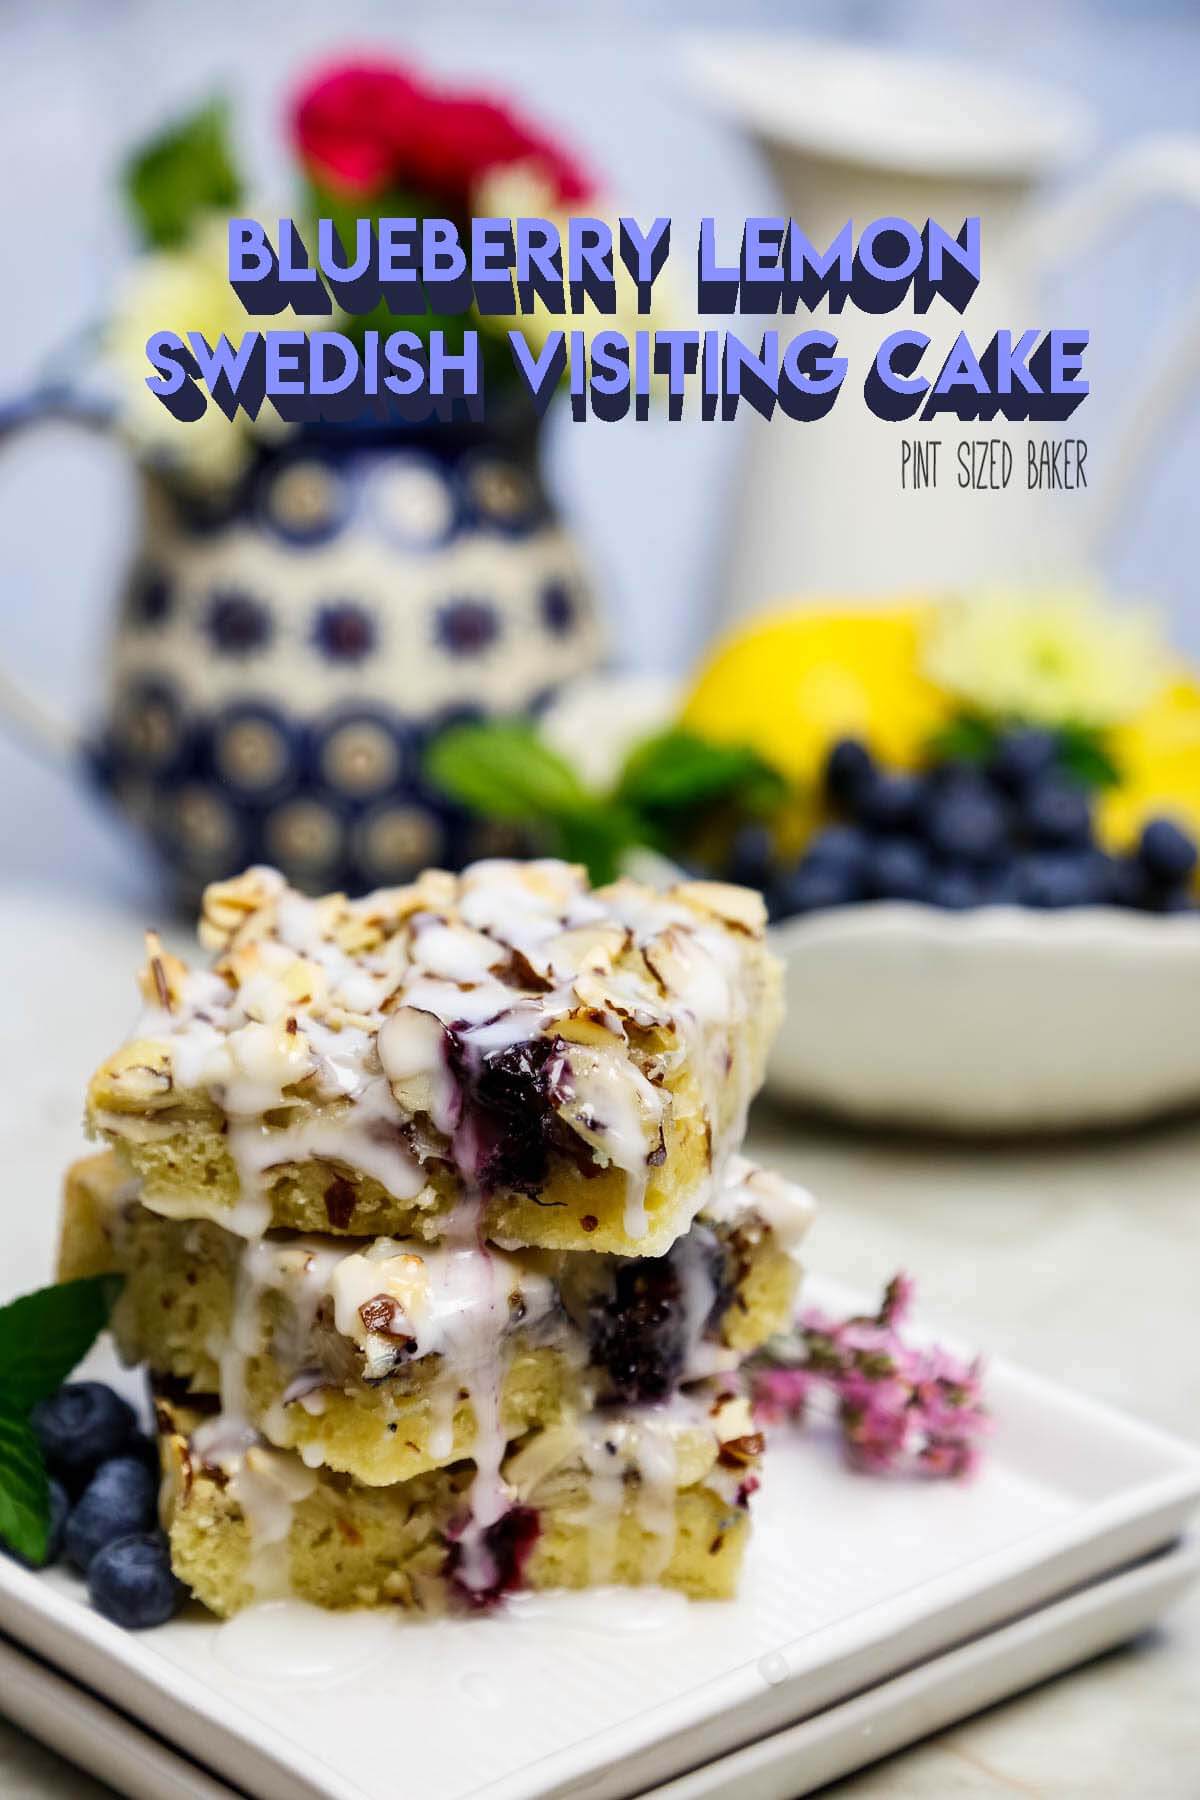 Bake the new neighbors this blueberry lemon Swedish visiting cake recipe. It's simple and delicious and perfect to give and receive.